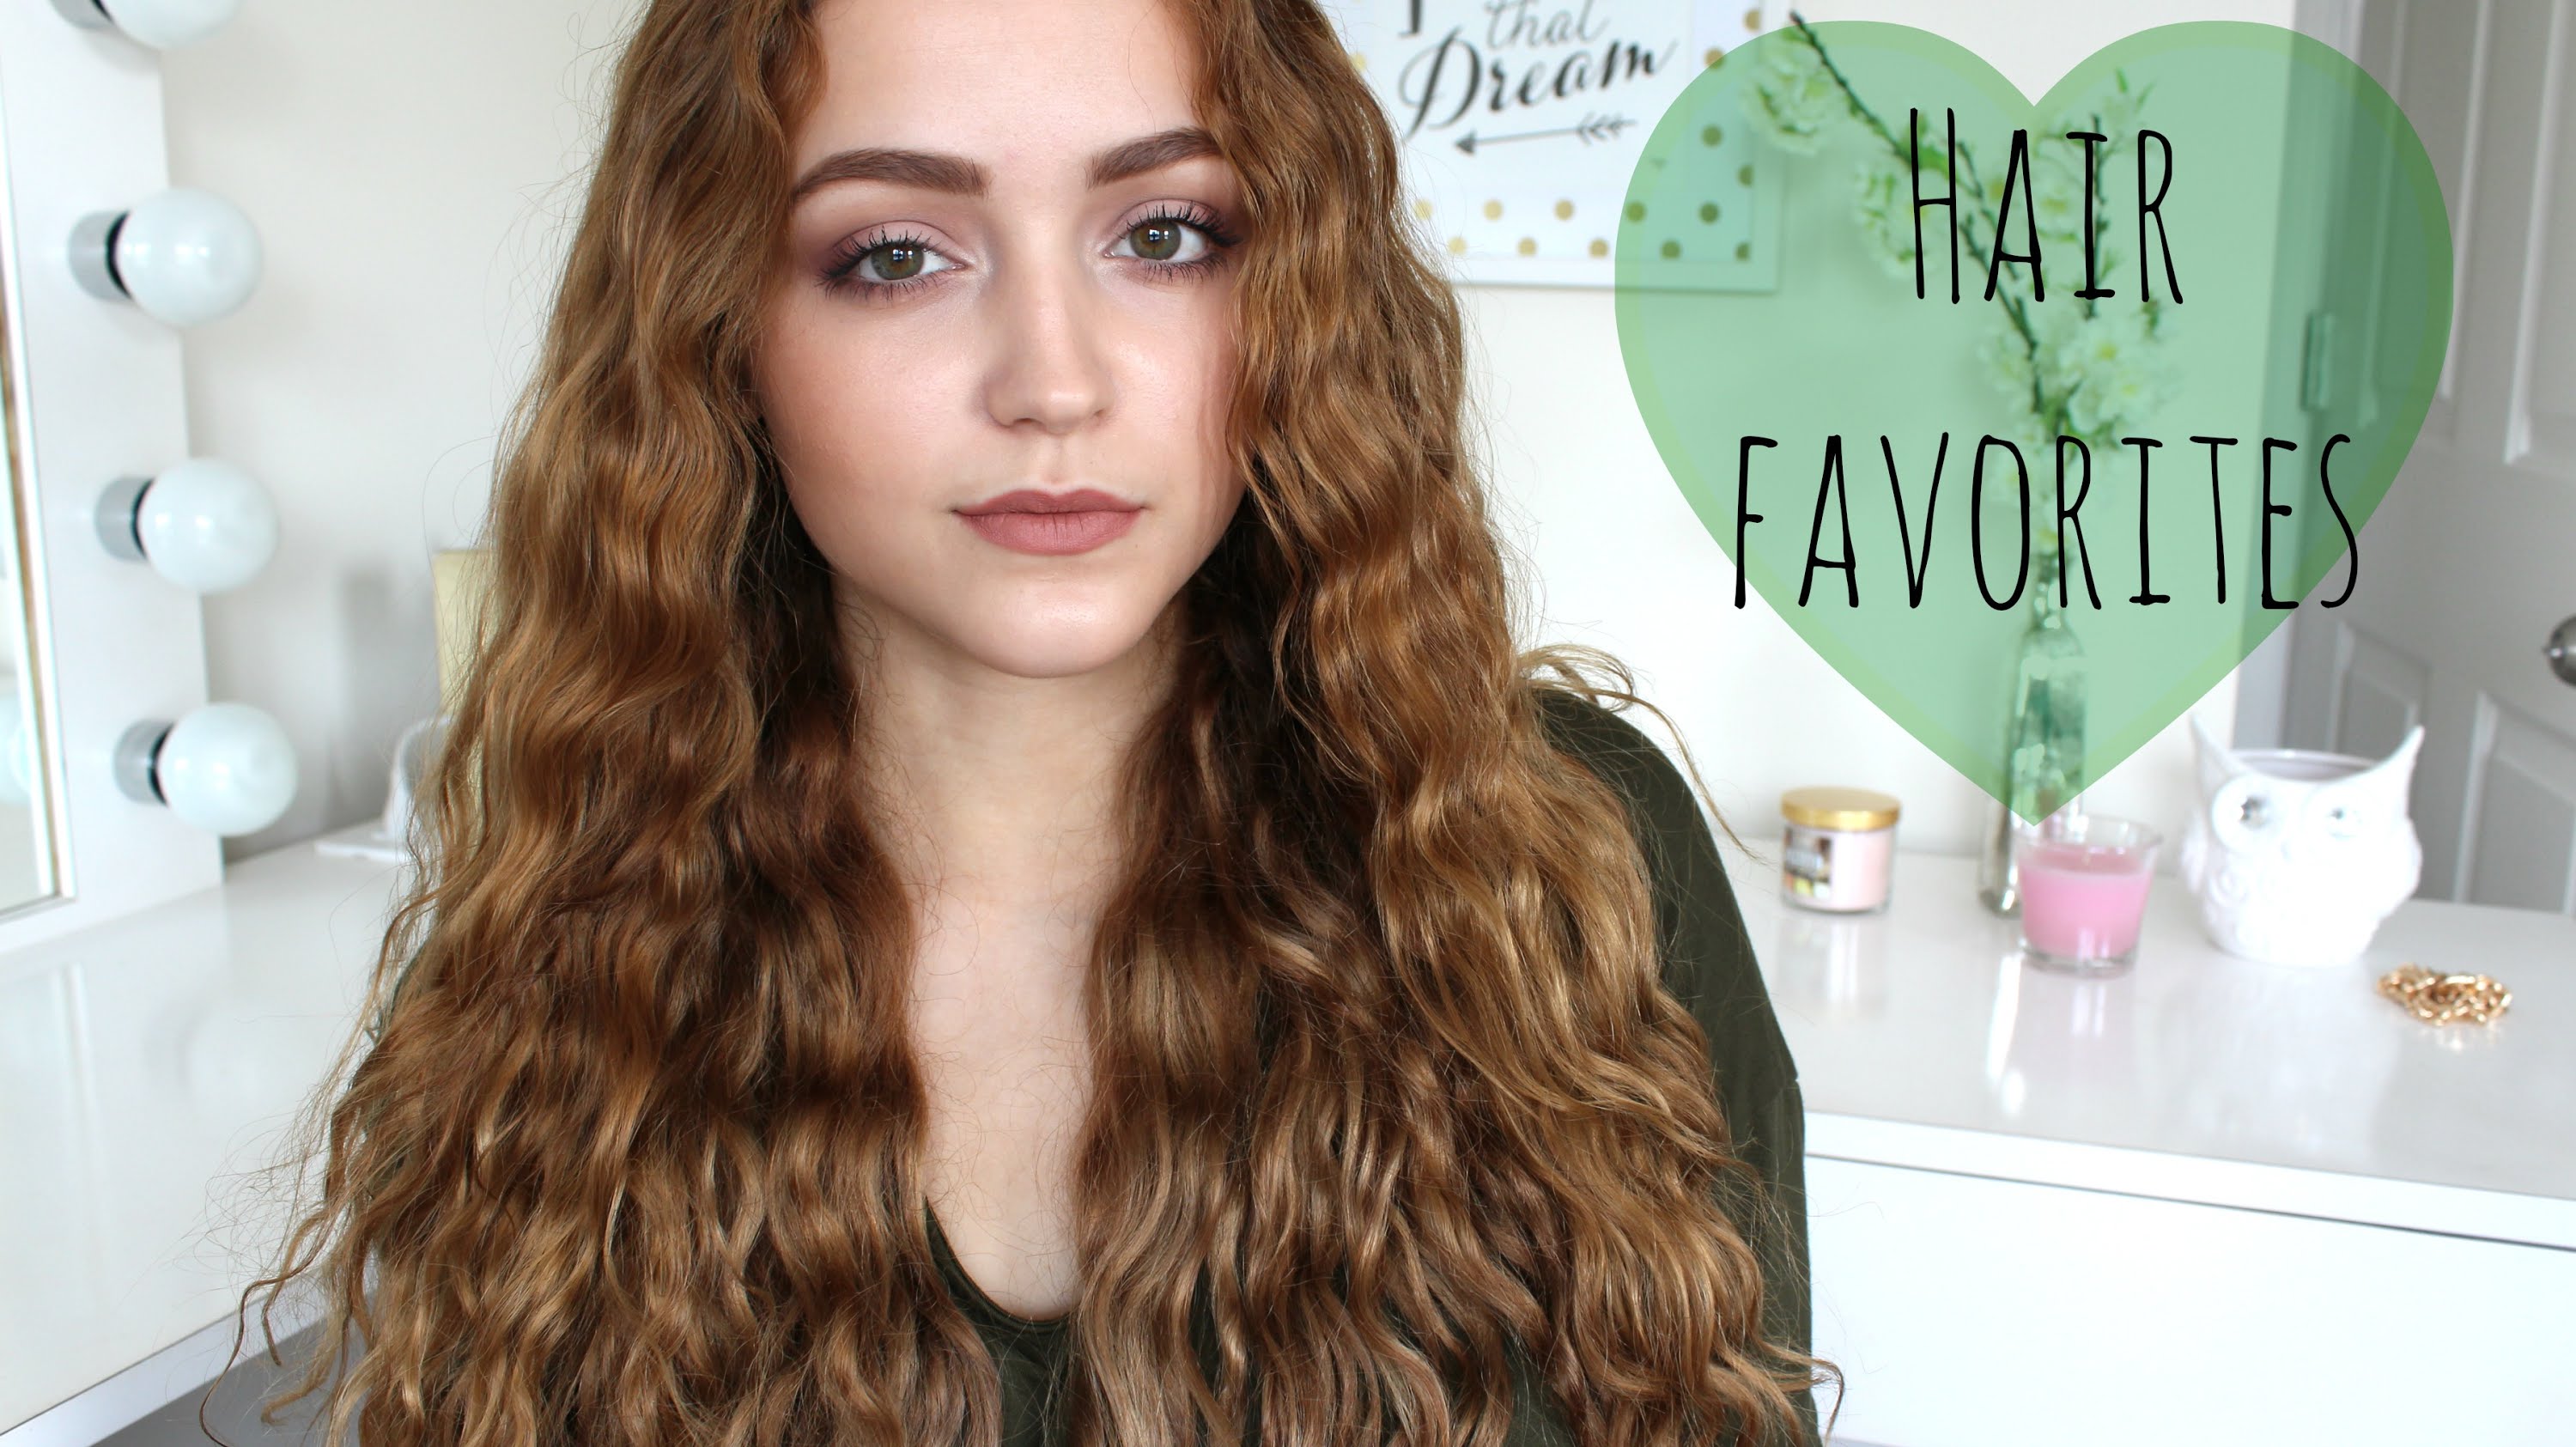 My Hair Care Routine +My Hair Color & Favorite Products! - YouTube